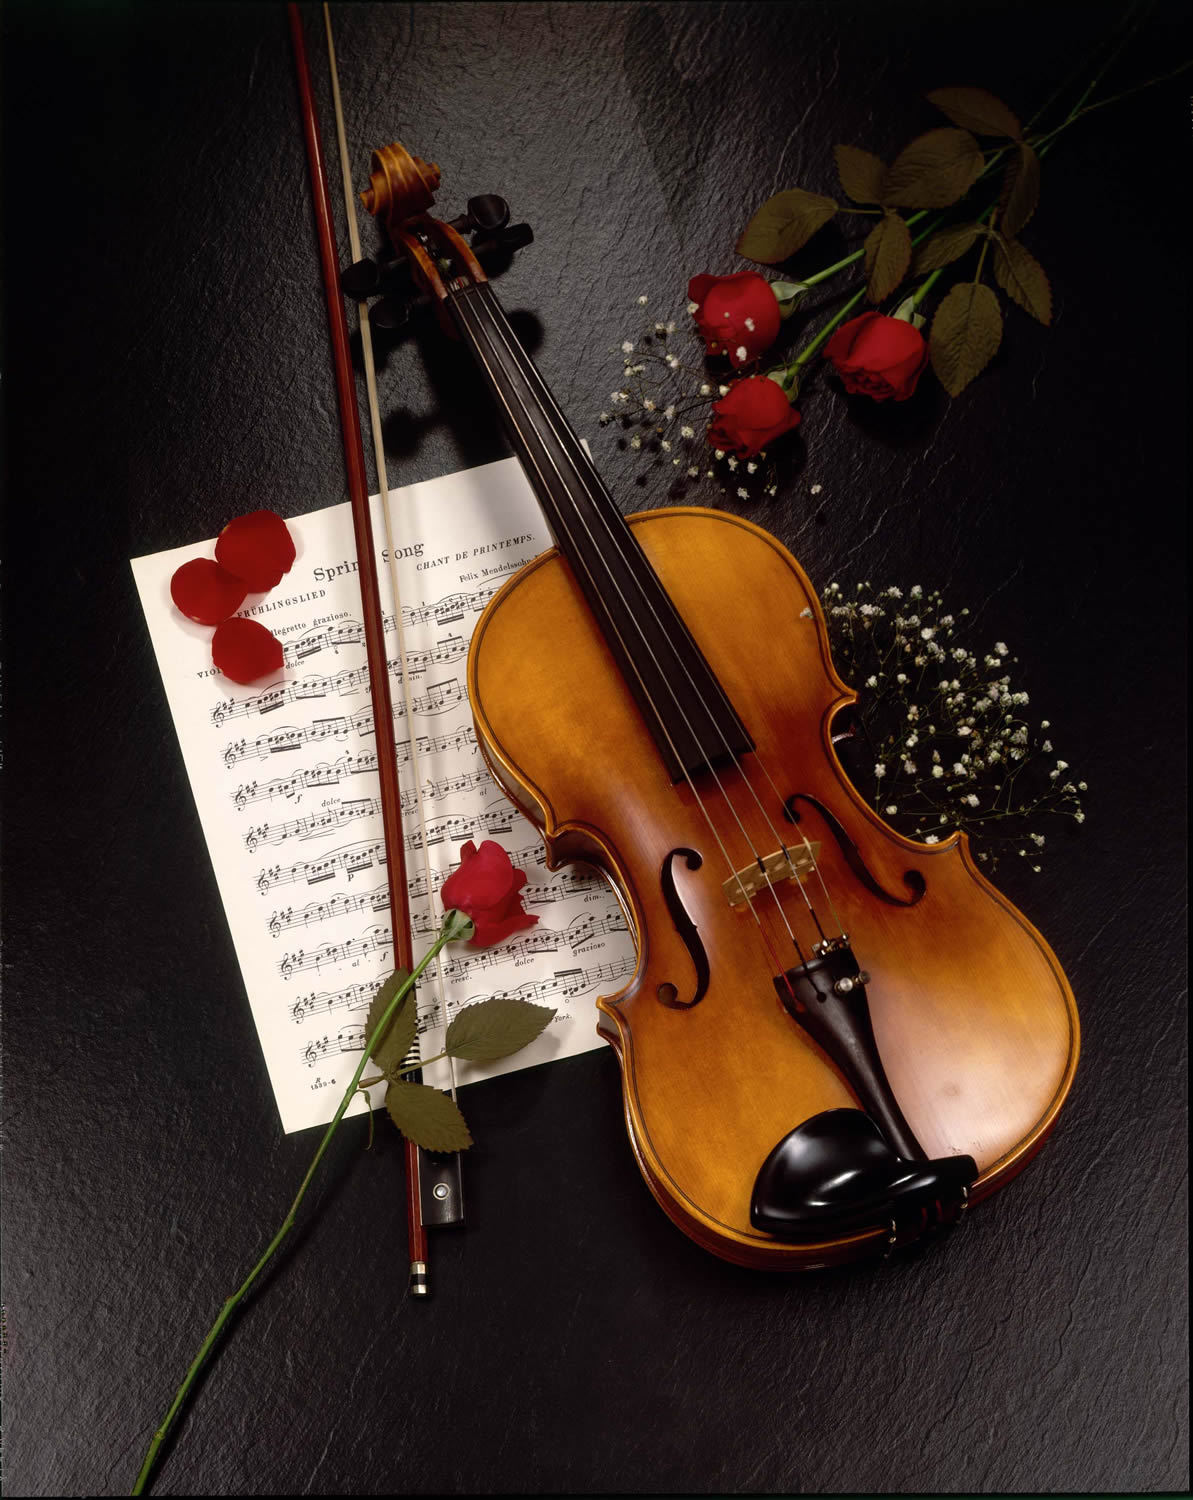 objects, violins, tools, black, music, flowers, roses 1080p